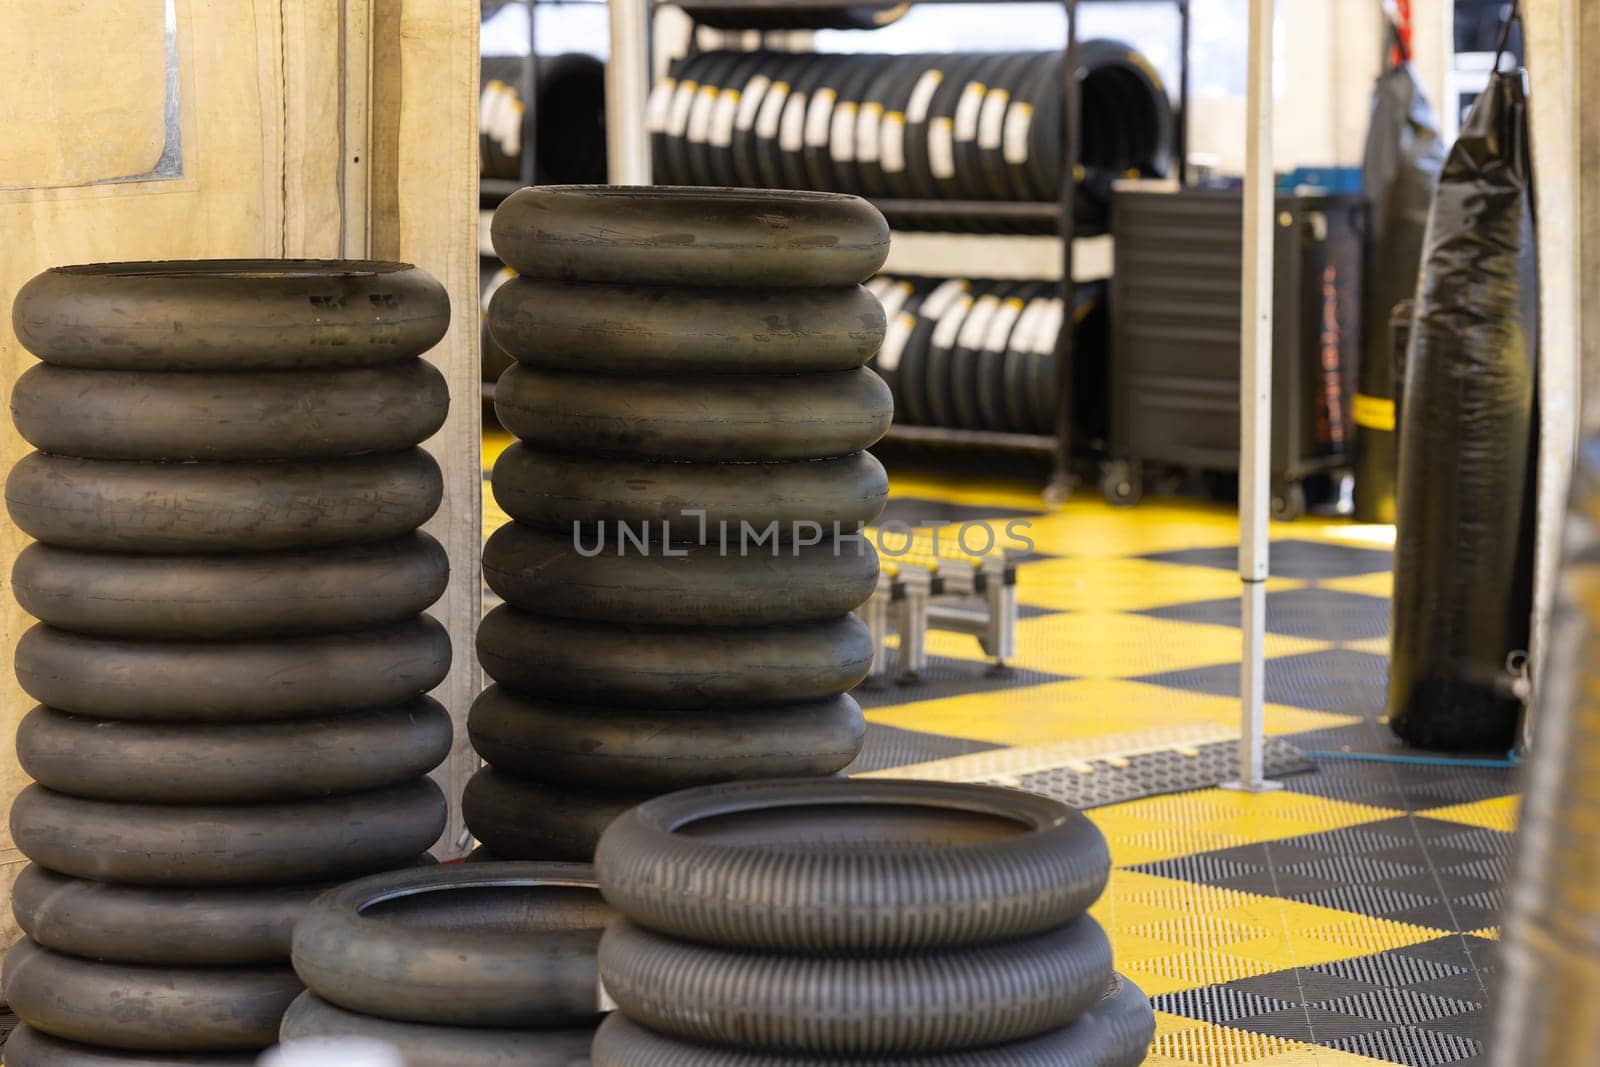 A Tower of Rubber Giants on a Chessboard Patterned Ground by Studia72